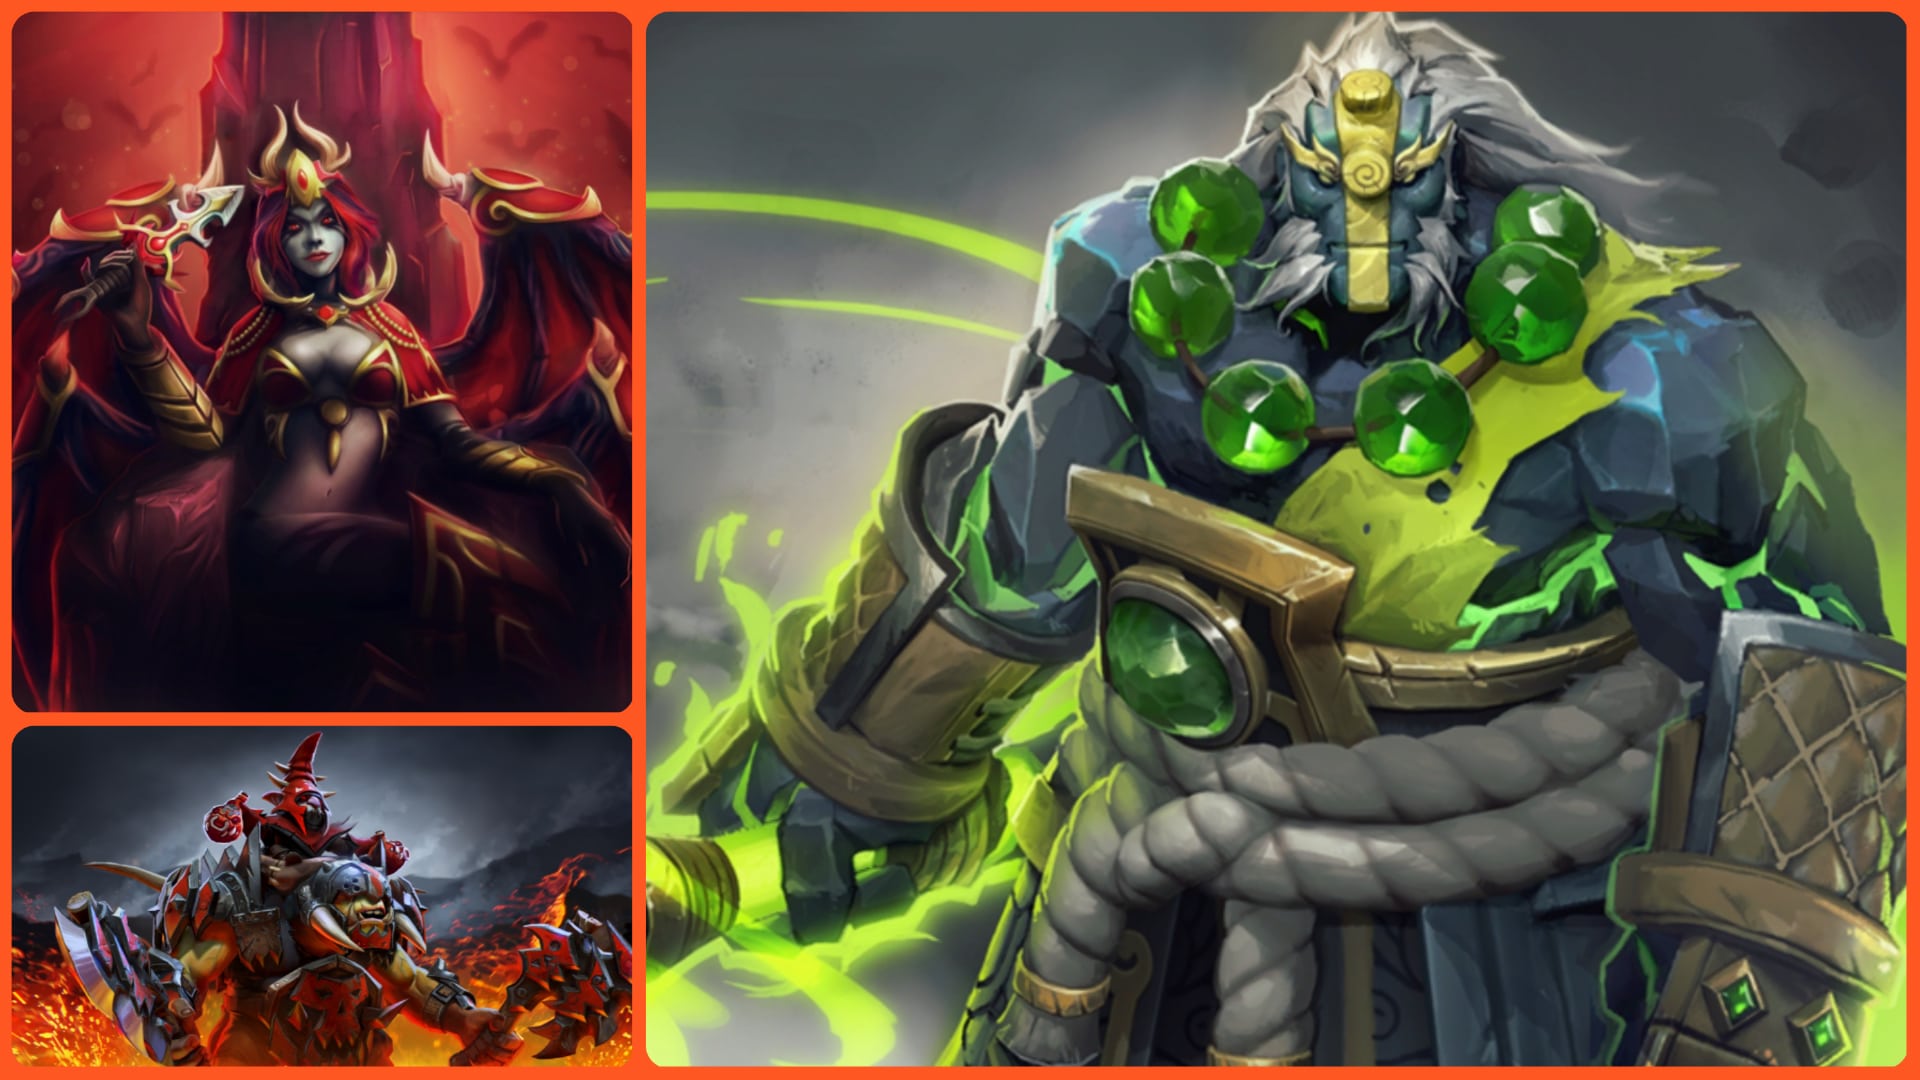 Dota 2: Battle Pass 2022 - Hardest Weekly Quests of Week 4 - Ft - Queen of Pain, Earth Spirit, and Alchemist on their way to victory